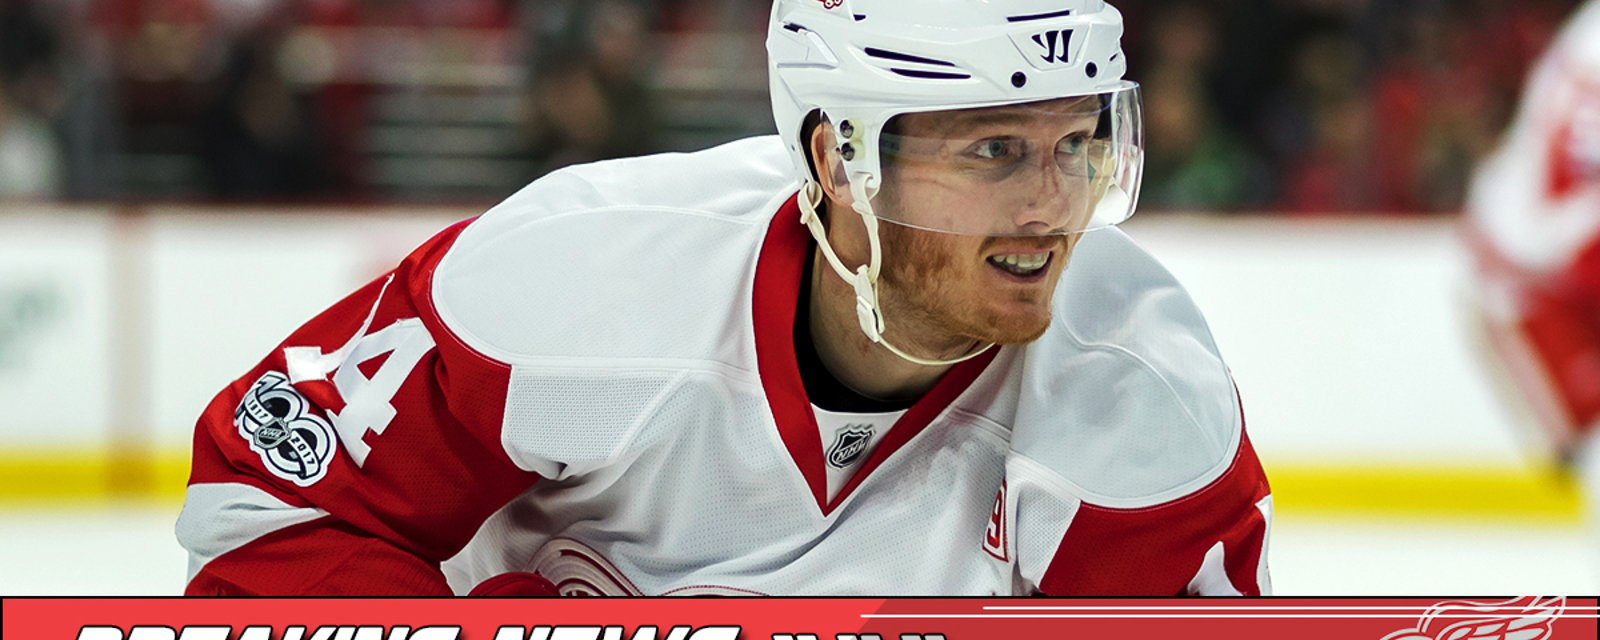 Gameday Report: Good news regarding Gustav Nyquist and more in the gameday report.